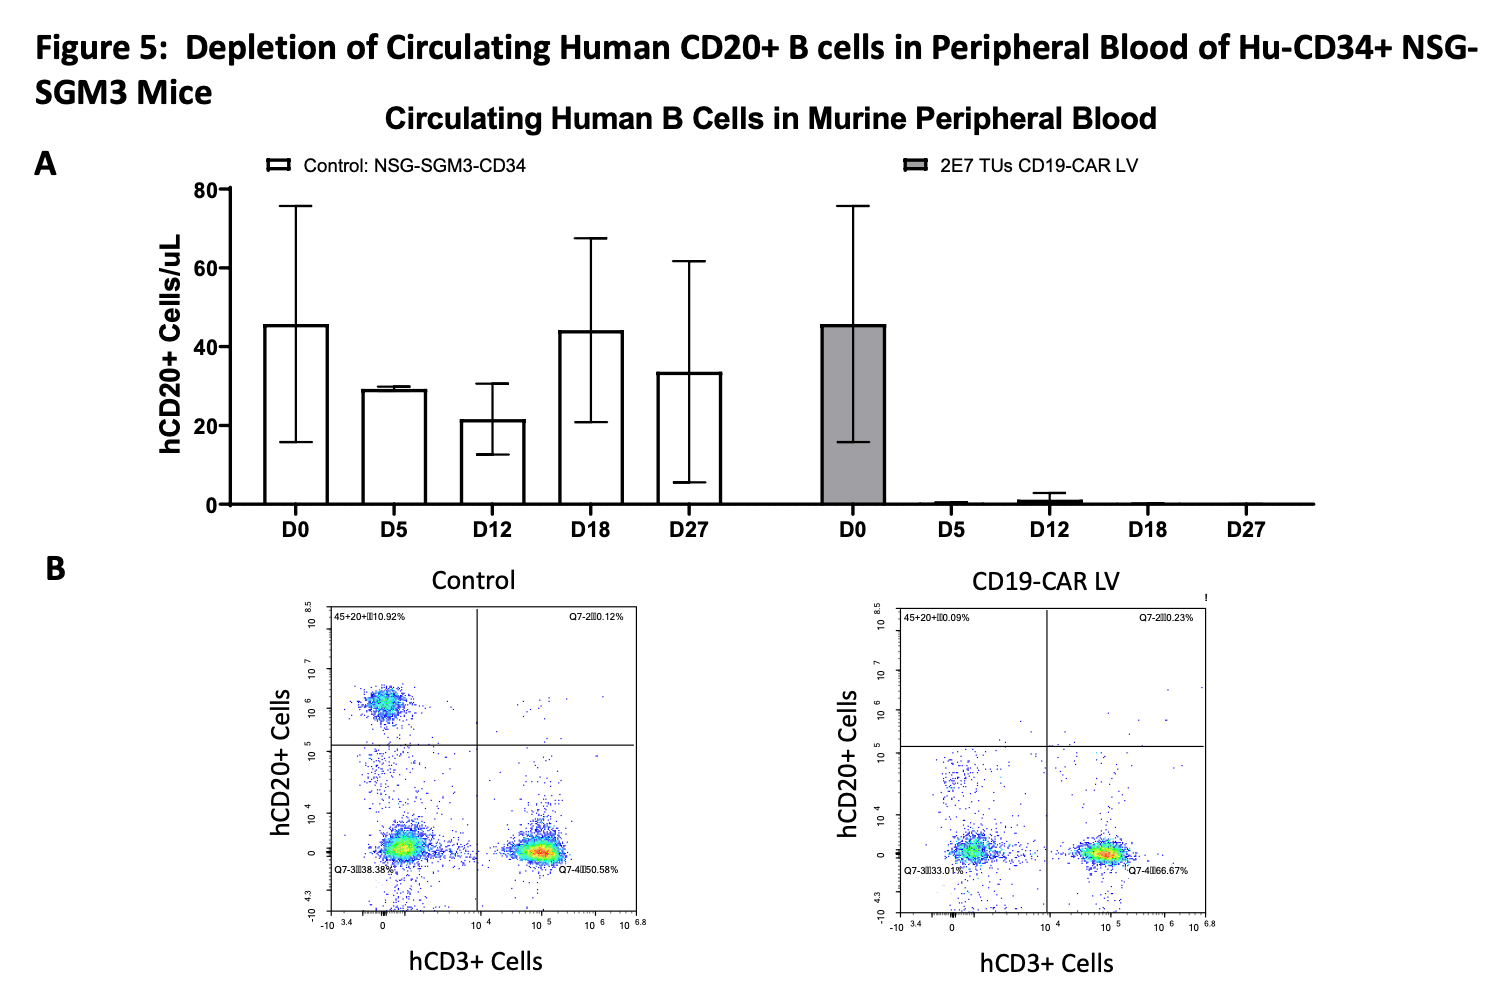 In vivo delivery of a novel CD3-targeted Lentiviral Vector generates CD19 CAR-T cells in two different humanized mouse models and results in complete B cell depletion Featured Image